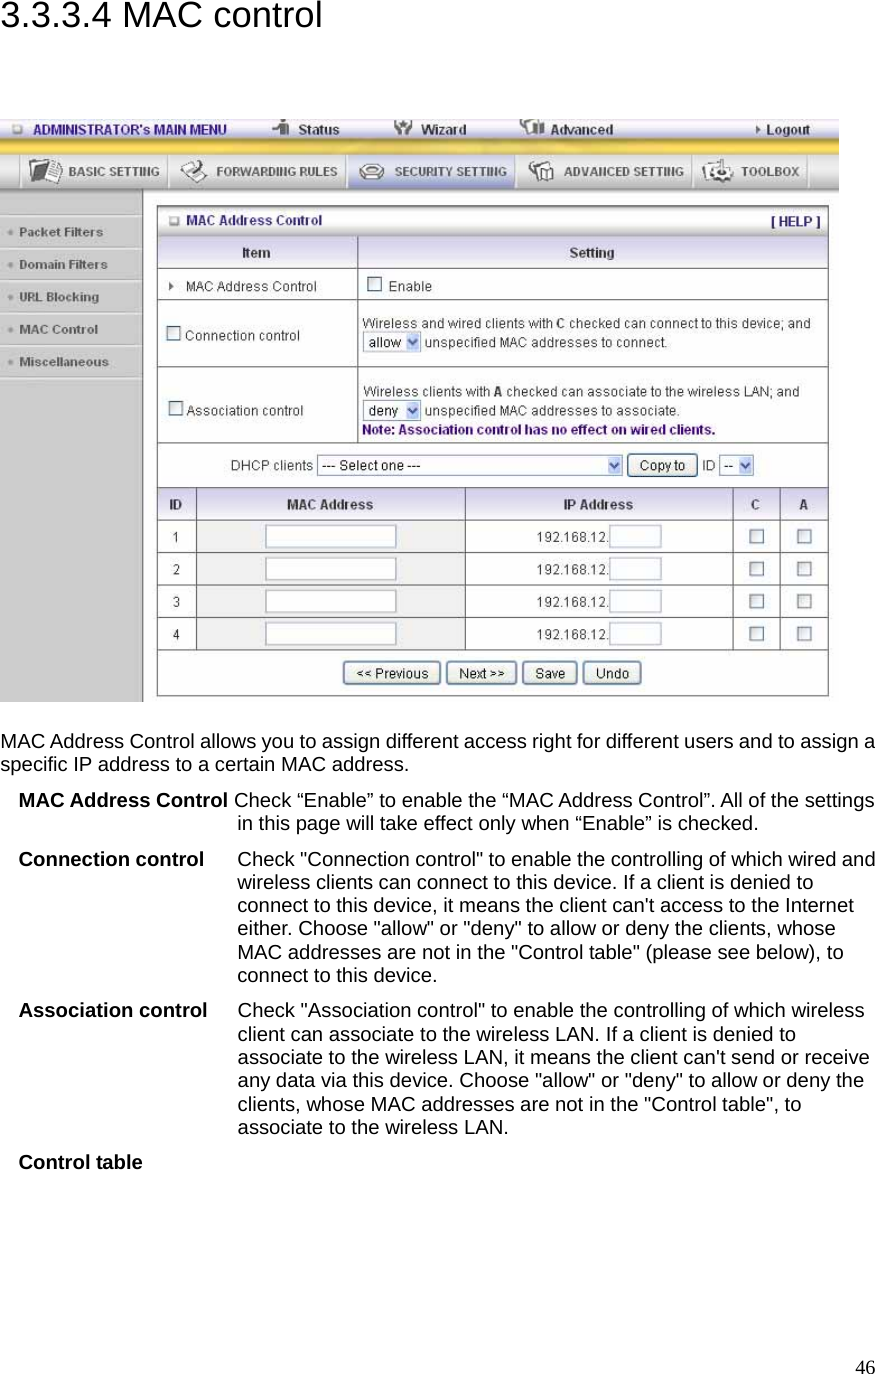  463.3.3.4 MAC control   MAC Address Control allows you to assign different access right for different users and to assign a specific IP address to a certain MAC address. MAC Address Control Check “Enable” to enable the “MAC Address Control”. All of the settings in this page will take effect only when “Enable” is checked. Connection control  Check &quot;Connection control&quot; to enable the controlling of which wired and wireless clients can connect to this device. If a client is denied to connect to this device, it means the client can&apos;t access to the Internet either. Choose &quot;allow&quot; or &quot;deny&quot; to allow or deny the clients, whose MAC addresses are not in the &quot;Control table&quot; (please see below), to connect to this device. Association control  Check &quot;Association control&quot; to enable the controlling of which wireless client can associate to the wireless LAN. If a client is denied to associate to the wireless LAN, it means the client can&apos;t send or receive any data via this device. Choose &quot;allow&quot; or &quot;deny&quot; to allow or deny the clients, whose MAC addresses are not in the &quot;Control table&quot;, to associate to the wireless LAN. Control table 